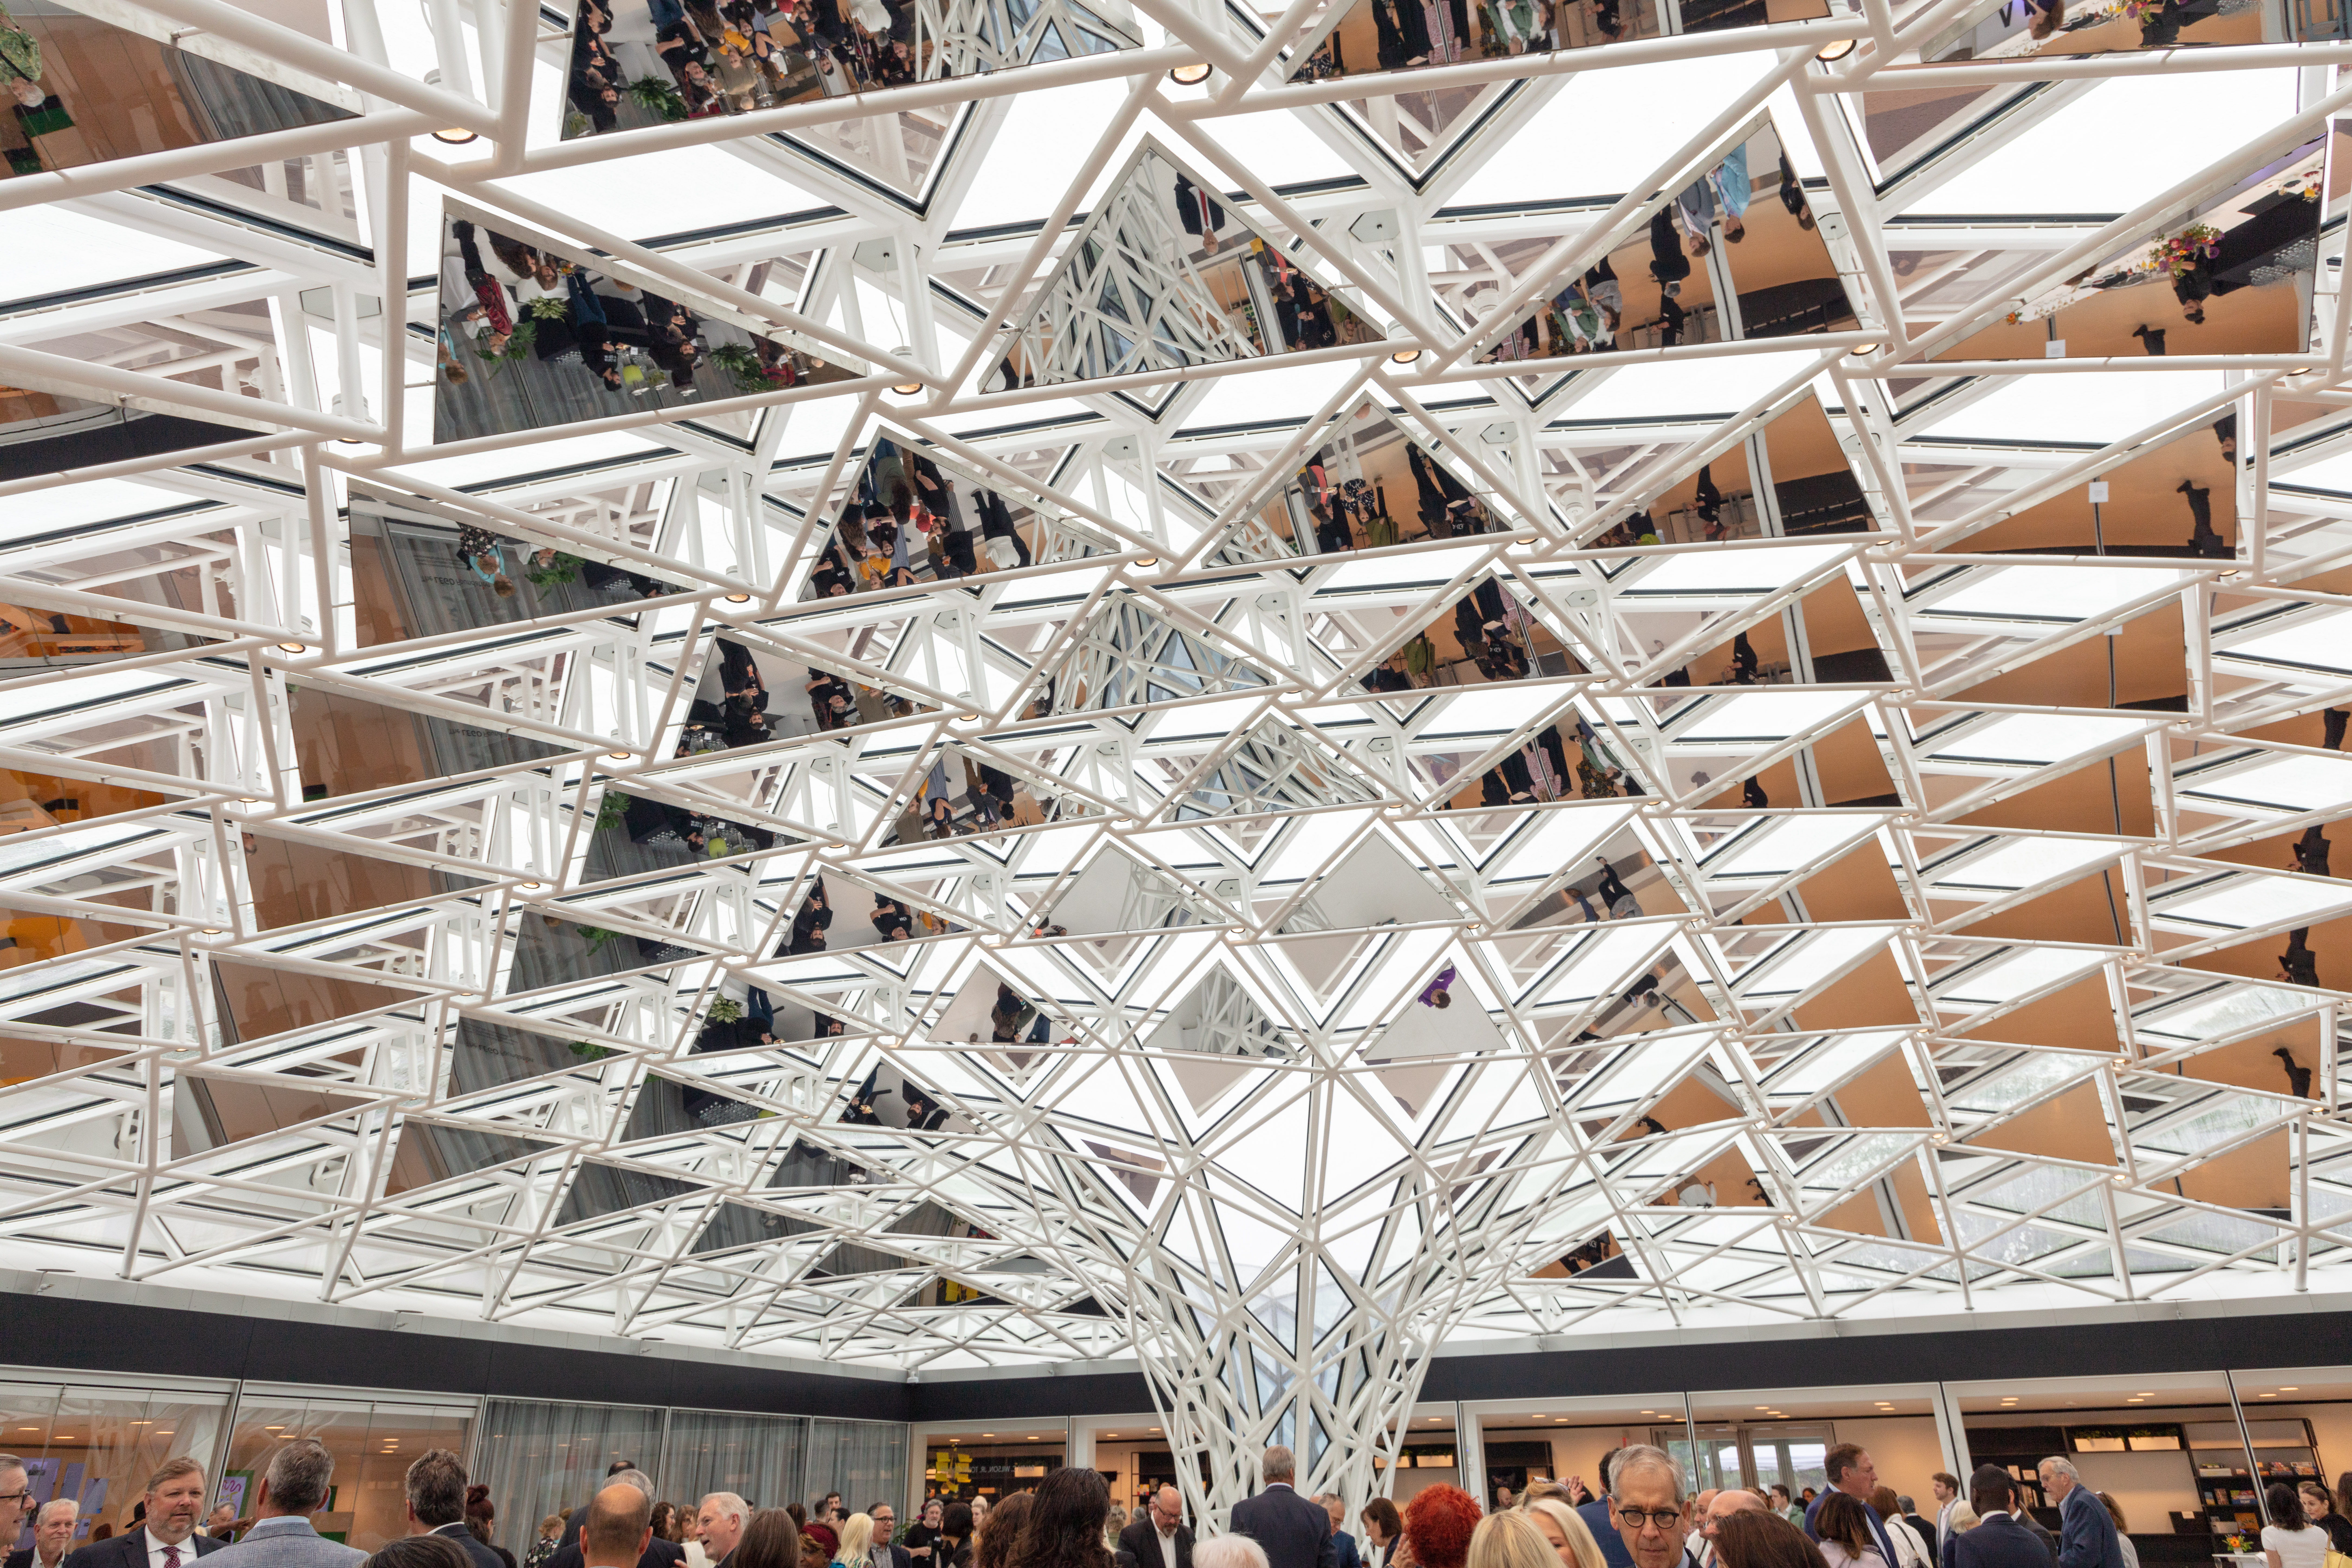 A mirrored, kaleidoscopic dome-like canopy over a courtyard full of people